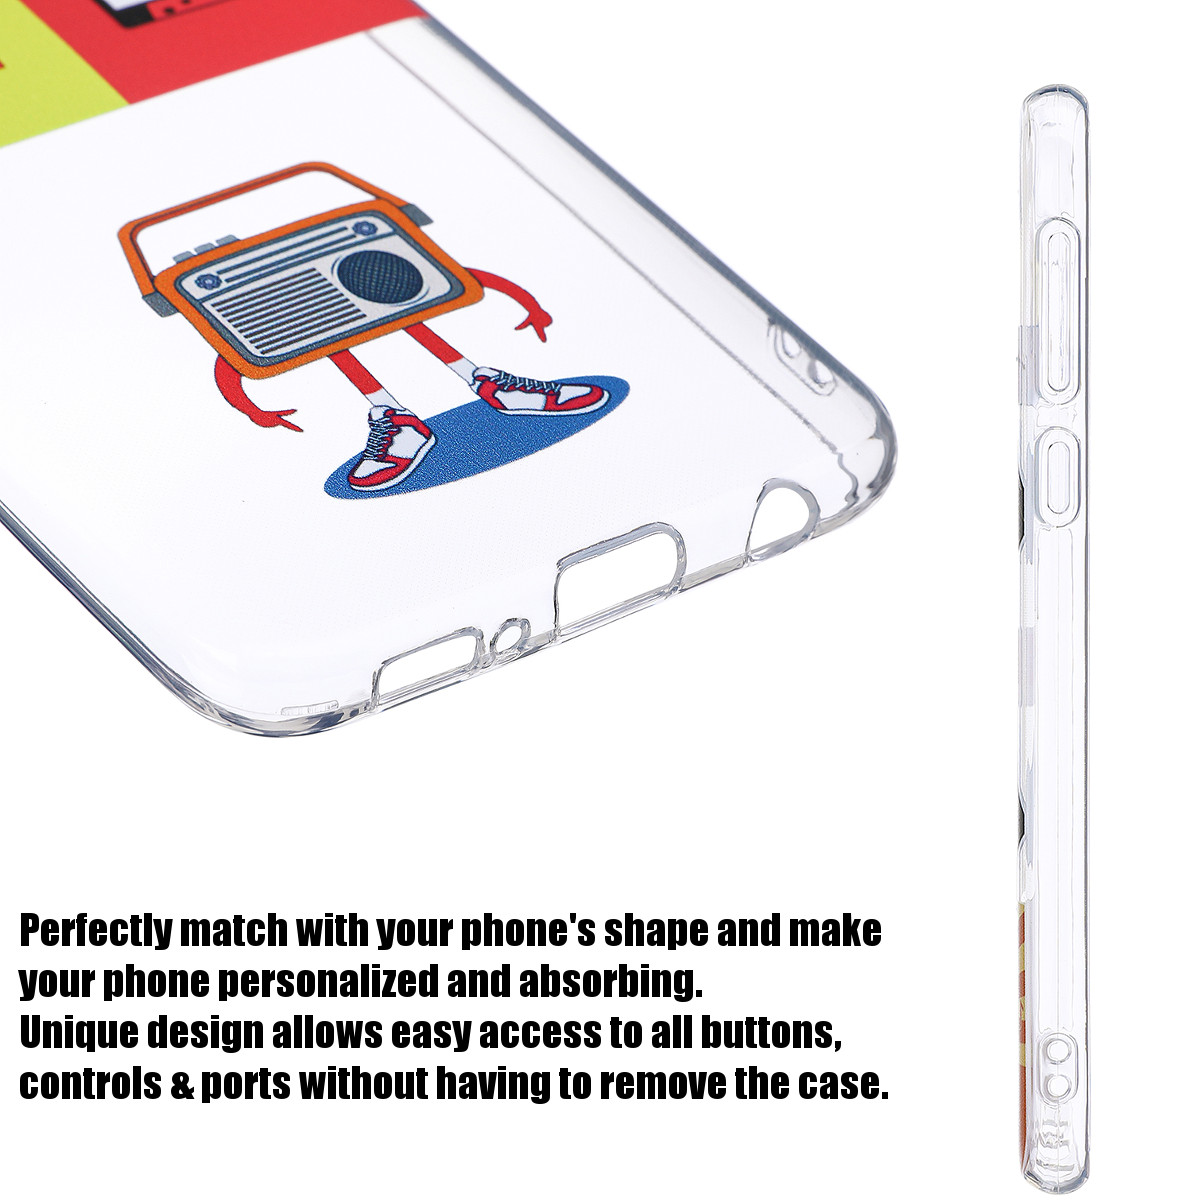 Bakeey-Cartoon-Matte-Transparent-Soft-TPU-Shockproof-Protective-Case-Cover-for-Samsung-Galaxy-S10e-1634633-5